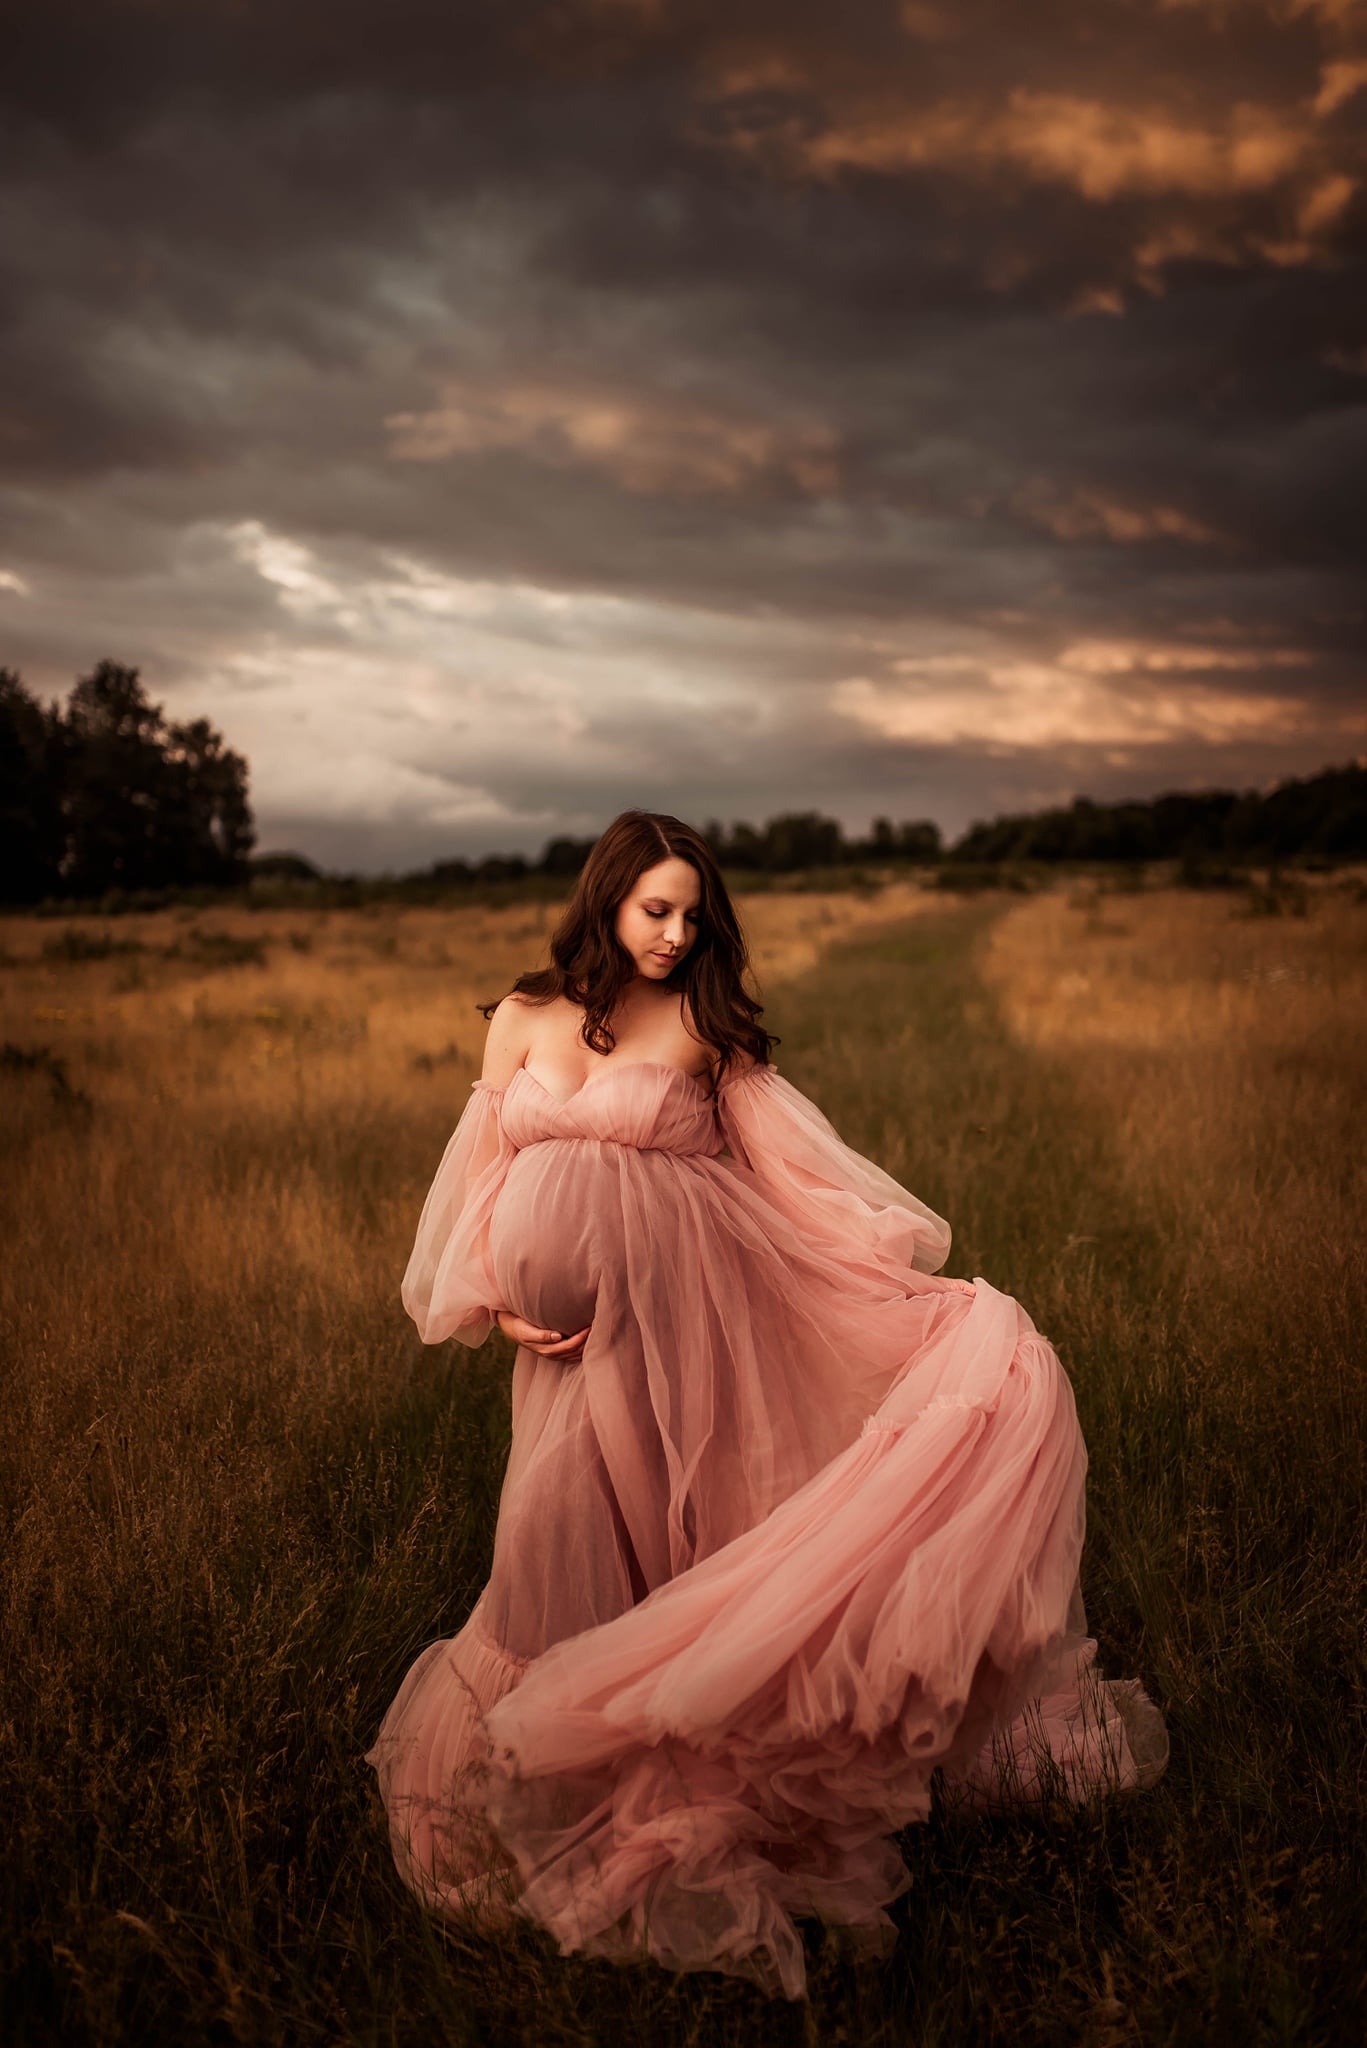 FOR HIRE / RENT tulle Maternity Photoshoot Event Dress " Florals" in Dusty Pink